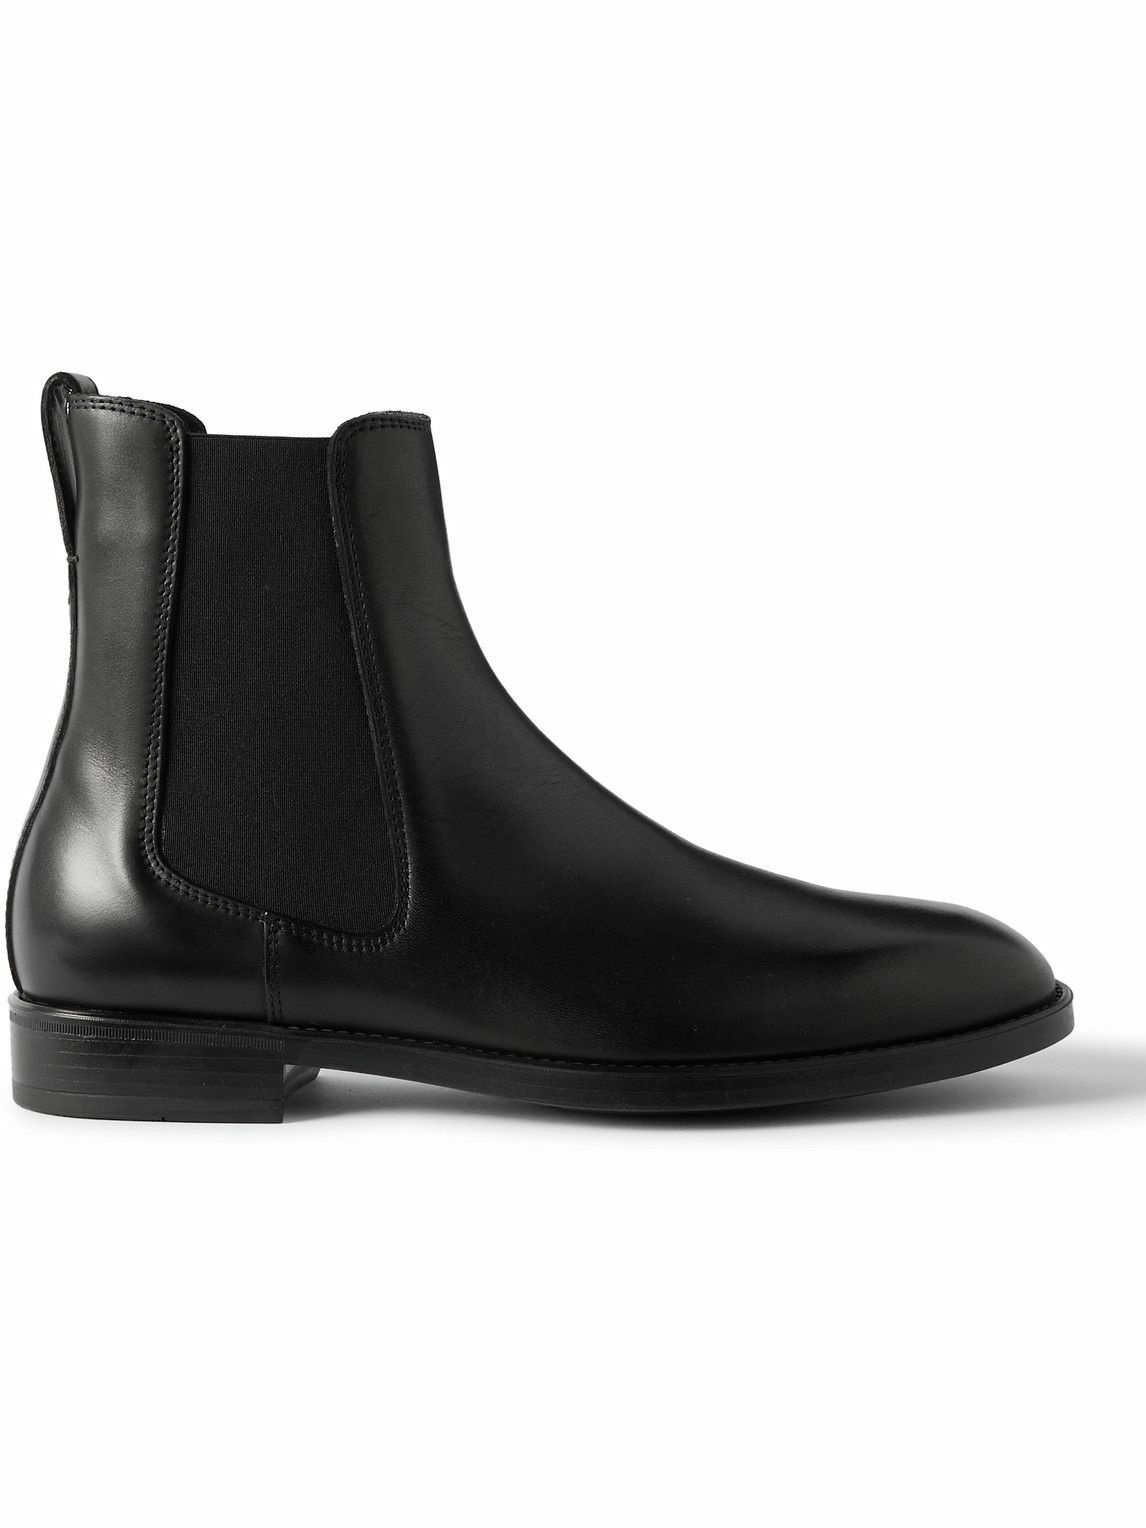 TOM FORD - Robert Burnished-Leather Chelsea Boots - Black TOM FORD